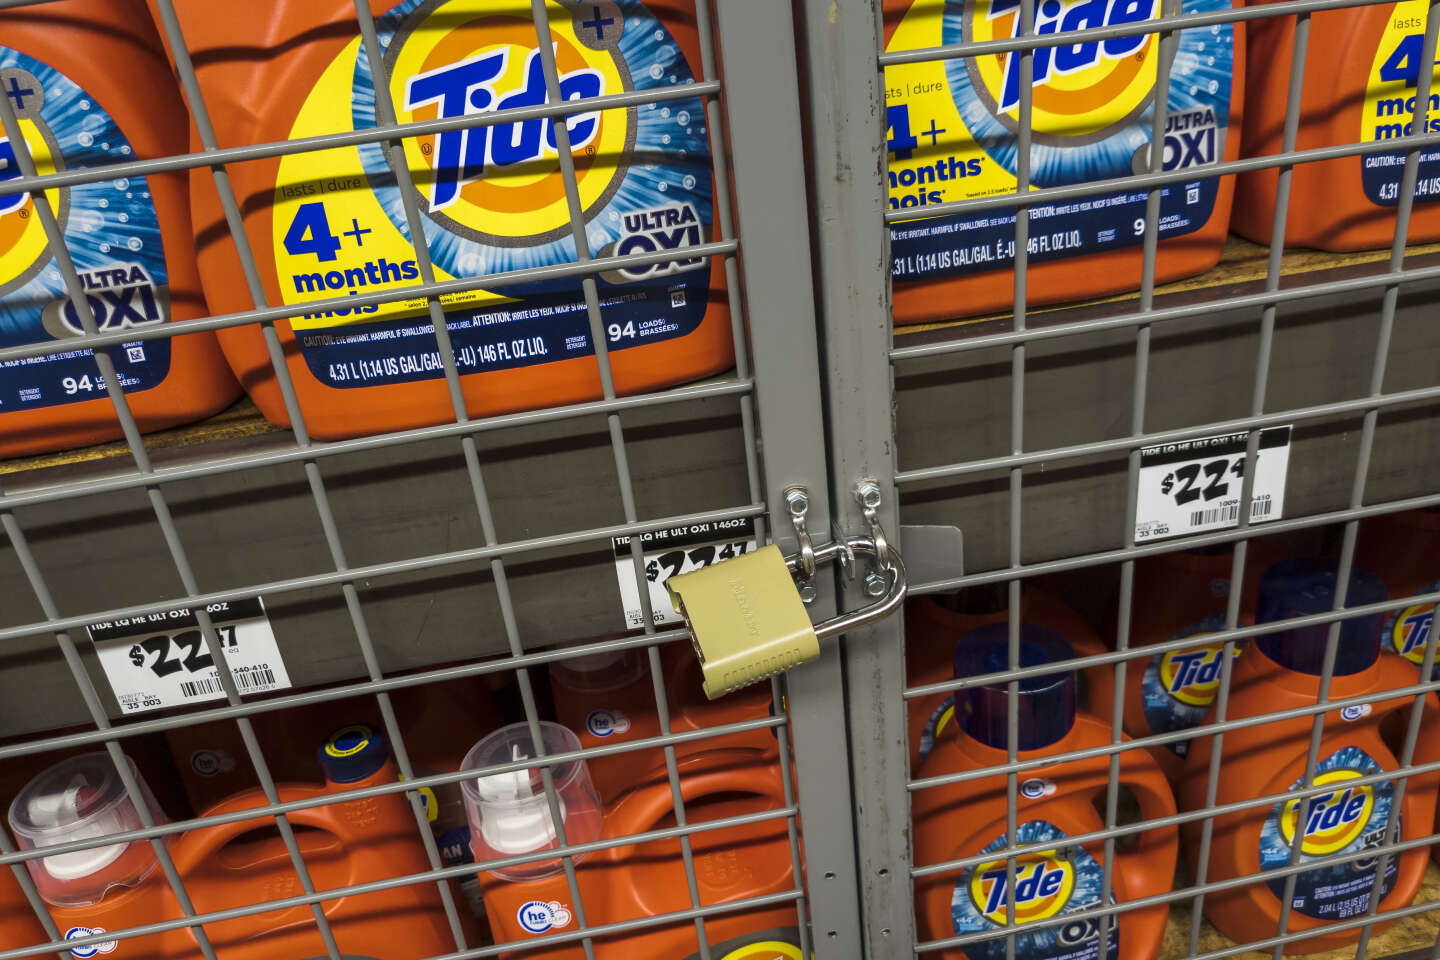 Laundry detergents and ice cream under lock and key in American supermarkets